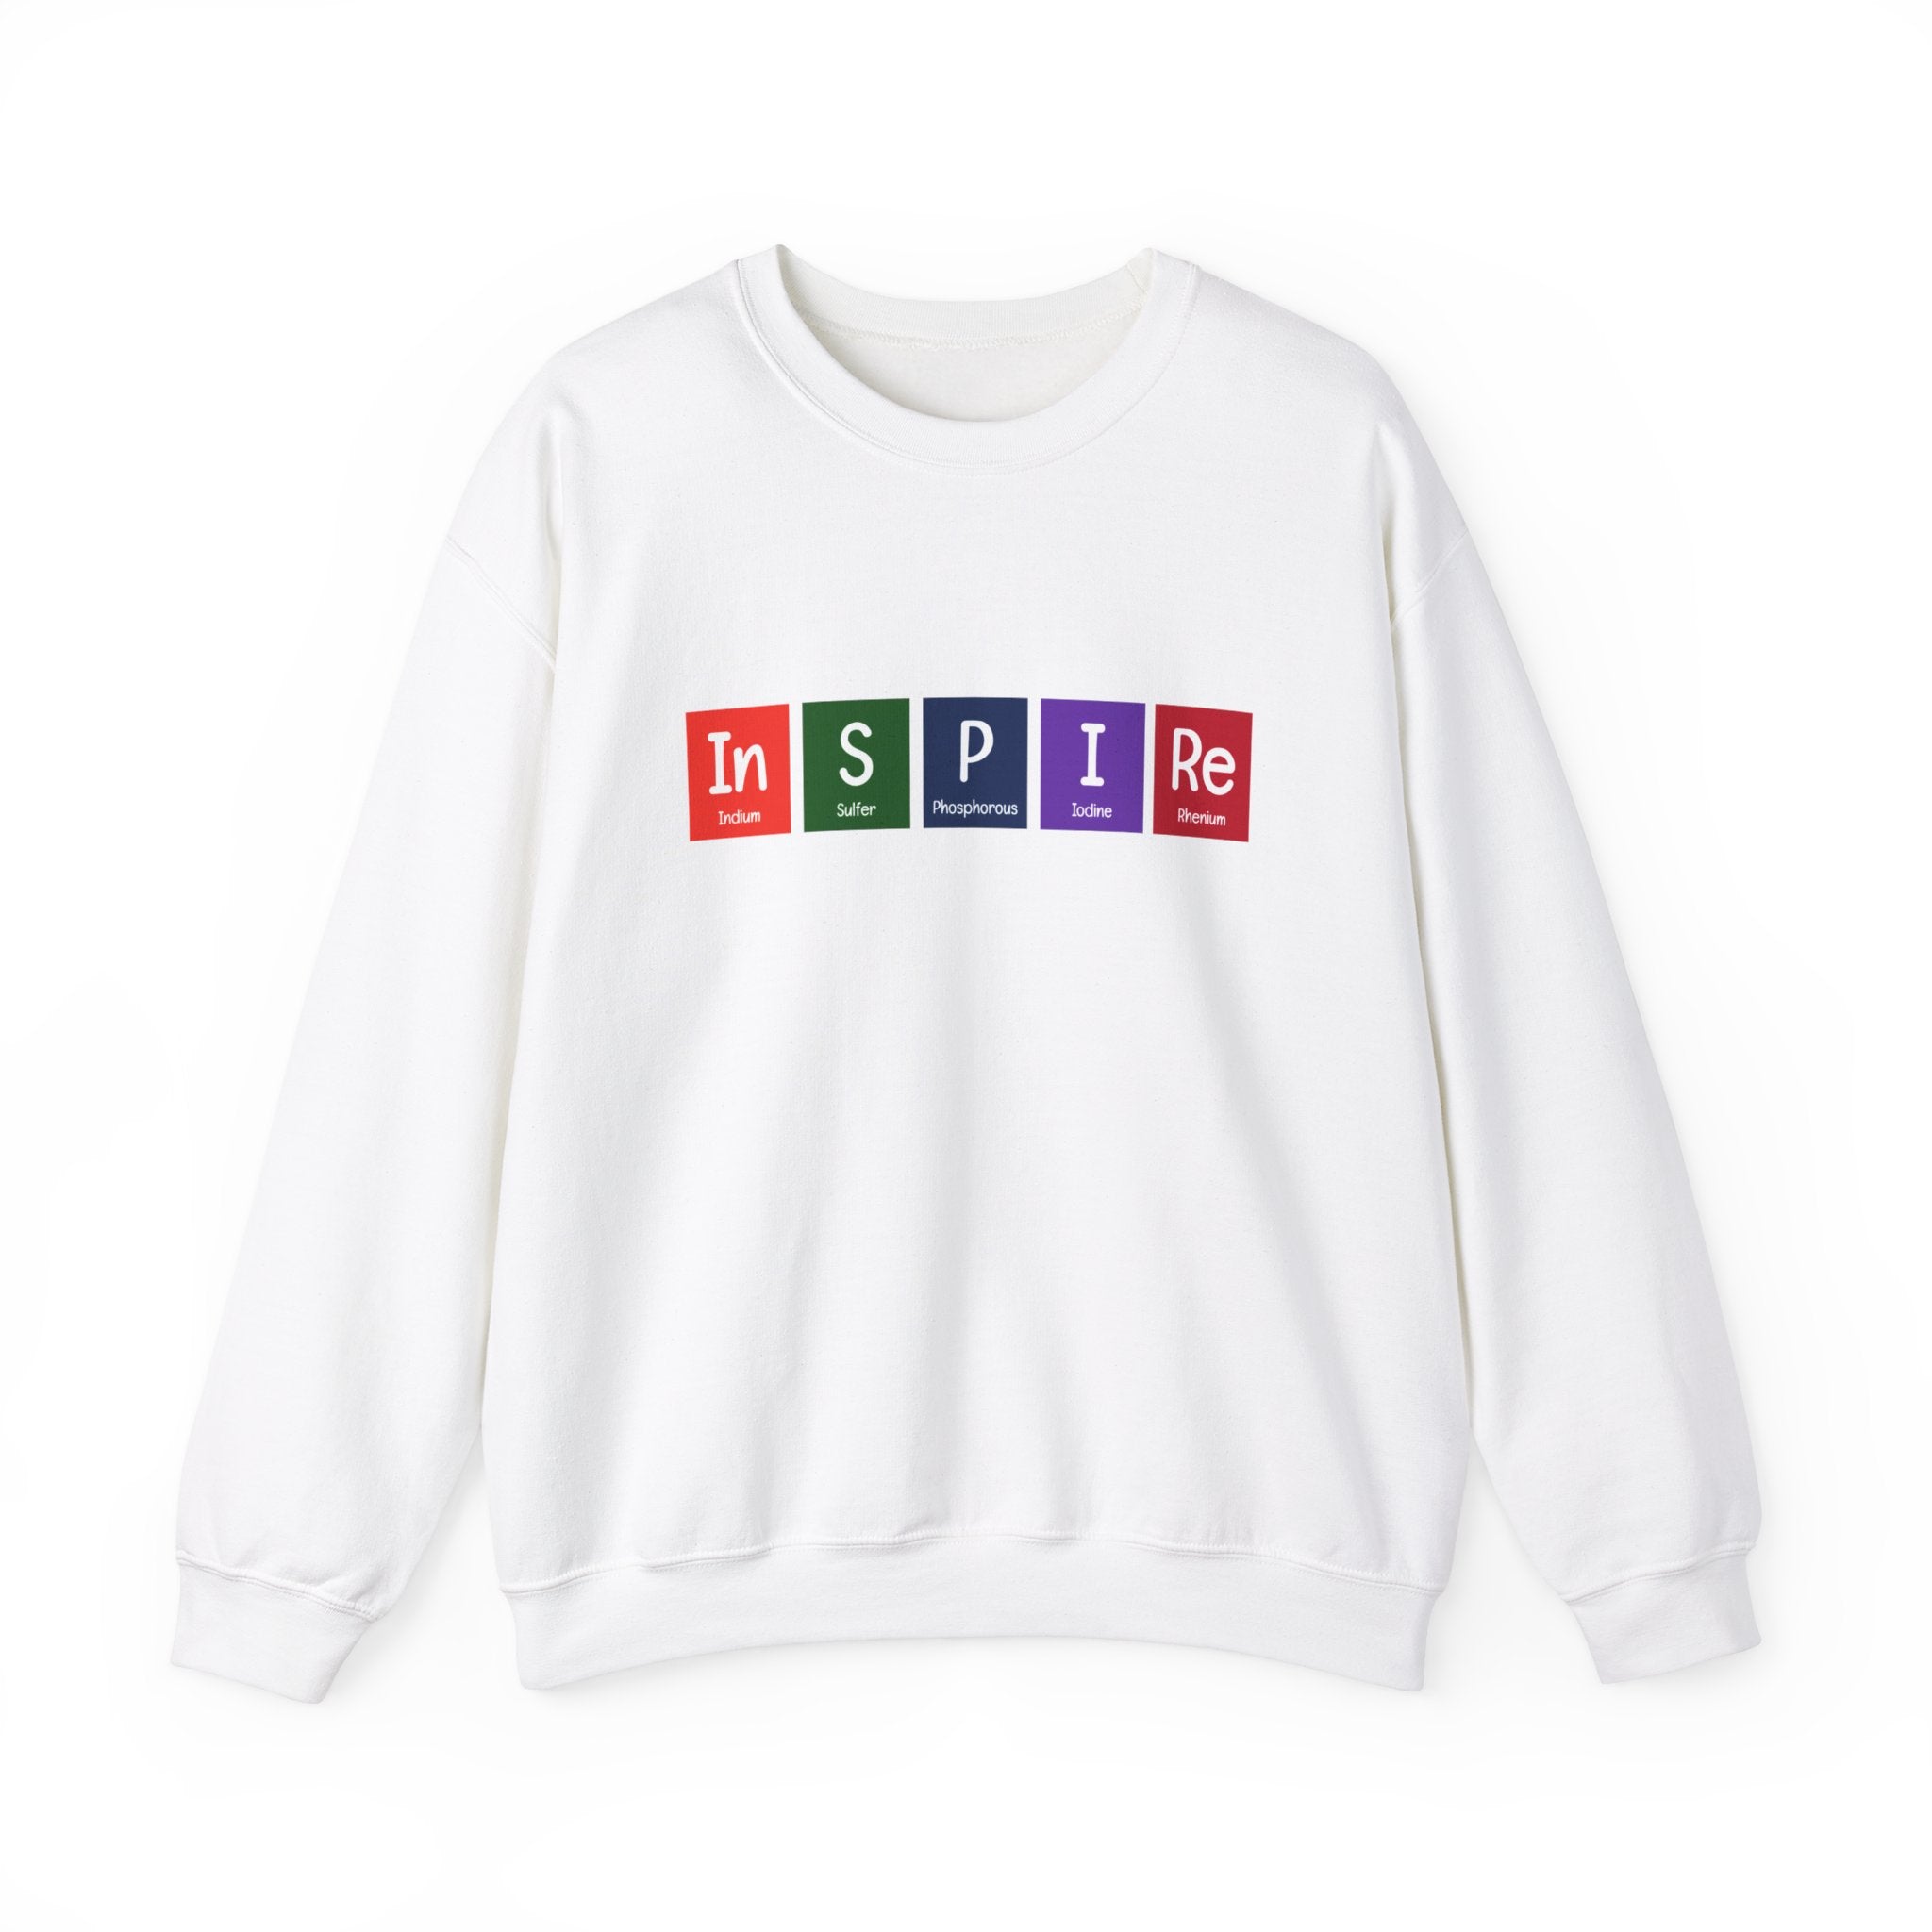 White crewneck sweatshirt with the word "In-S-P-I-Re - Sweatshirt" in colored blocks across the chest. Each letter in "In-S-P-I-Re - Sweatshirt" is displayed in its own block of either red, green, blue, or purple. This cozy sweatshirt is perfect for a dose of inspiration during the colder months.